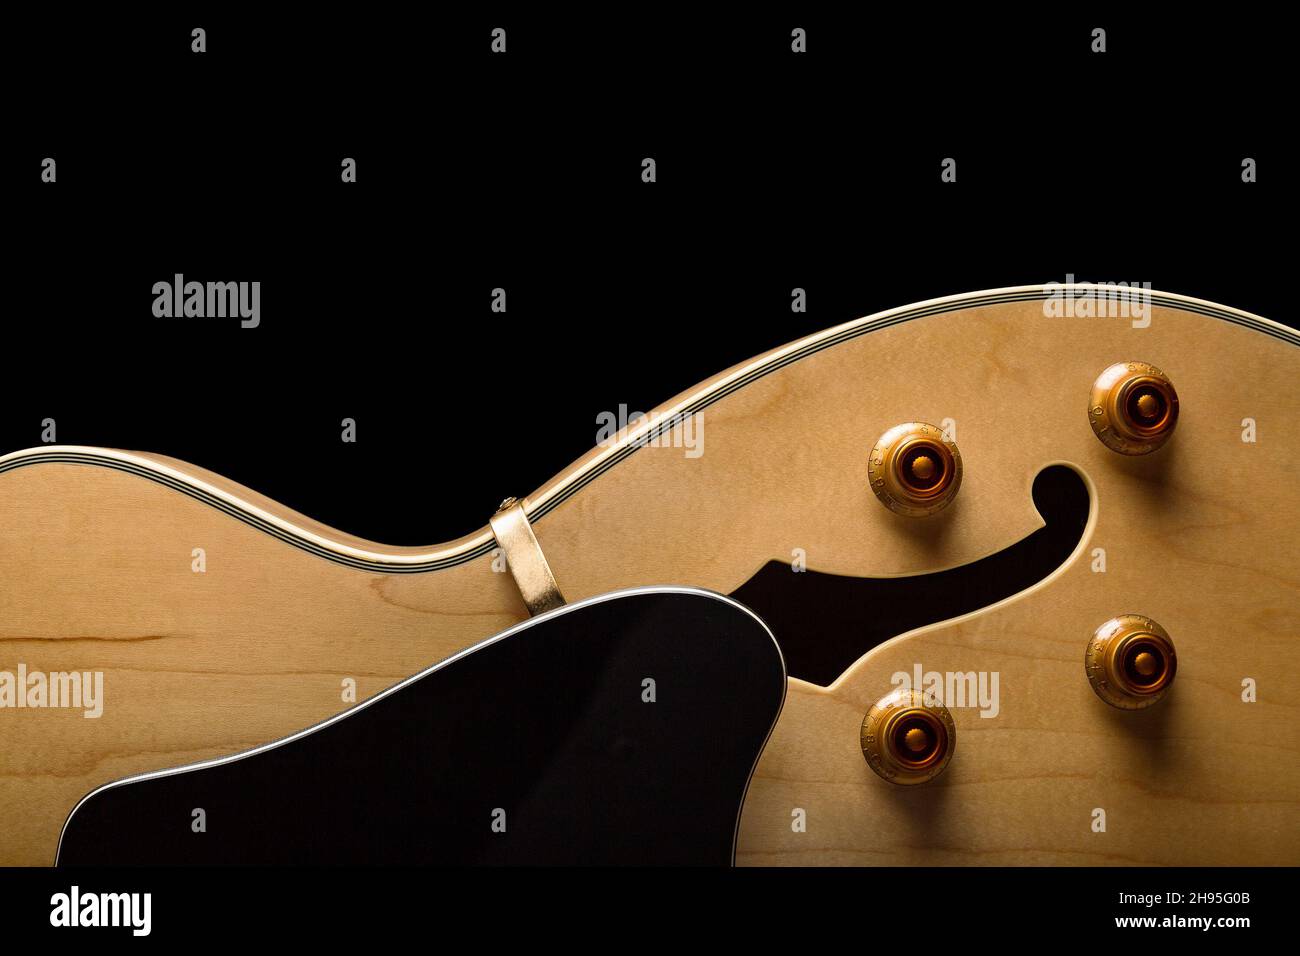 Pale wood guitar on bottom of image with buttons and white pickguard Stock Photo